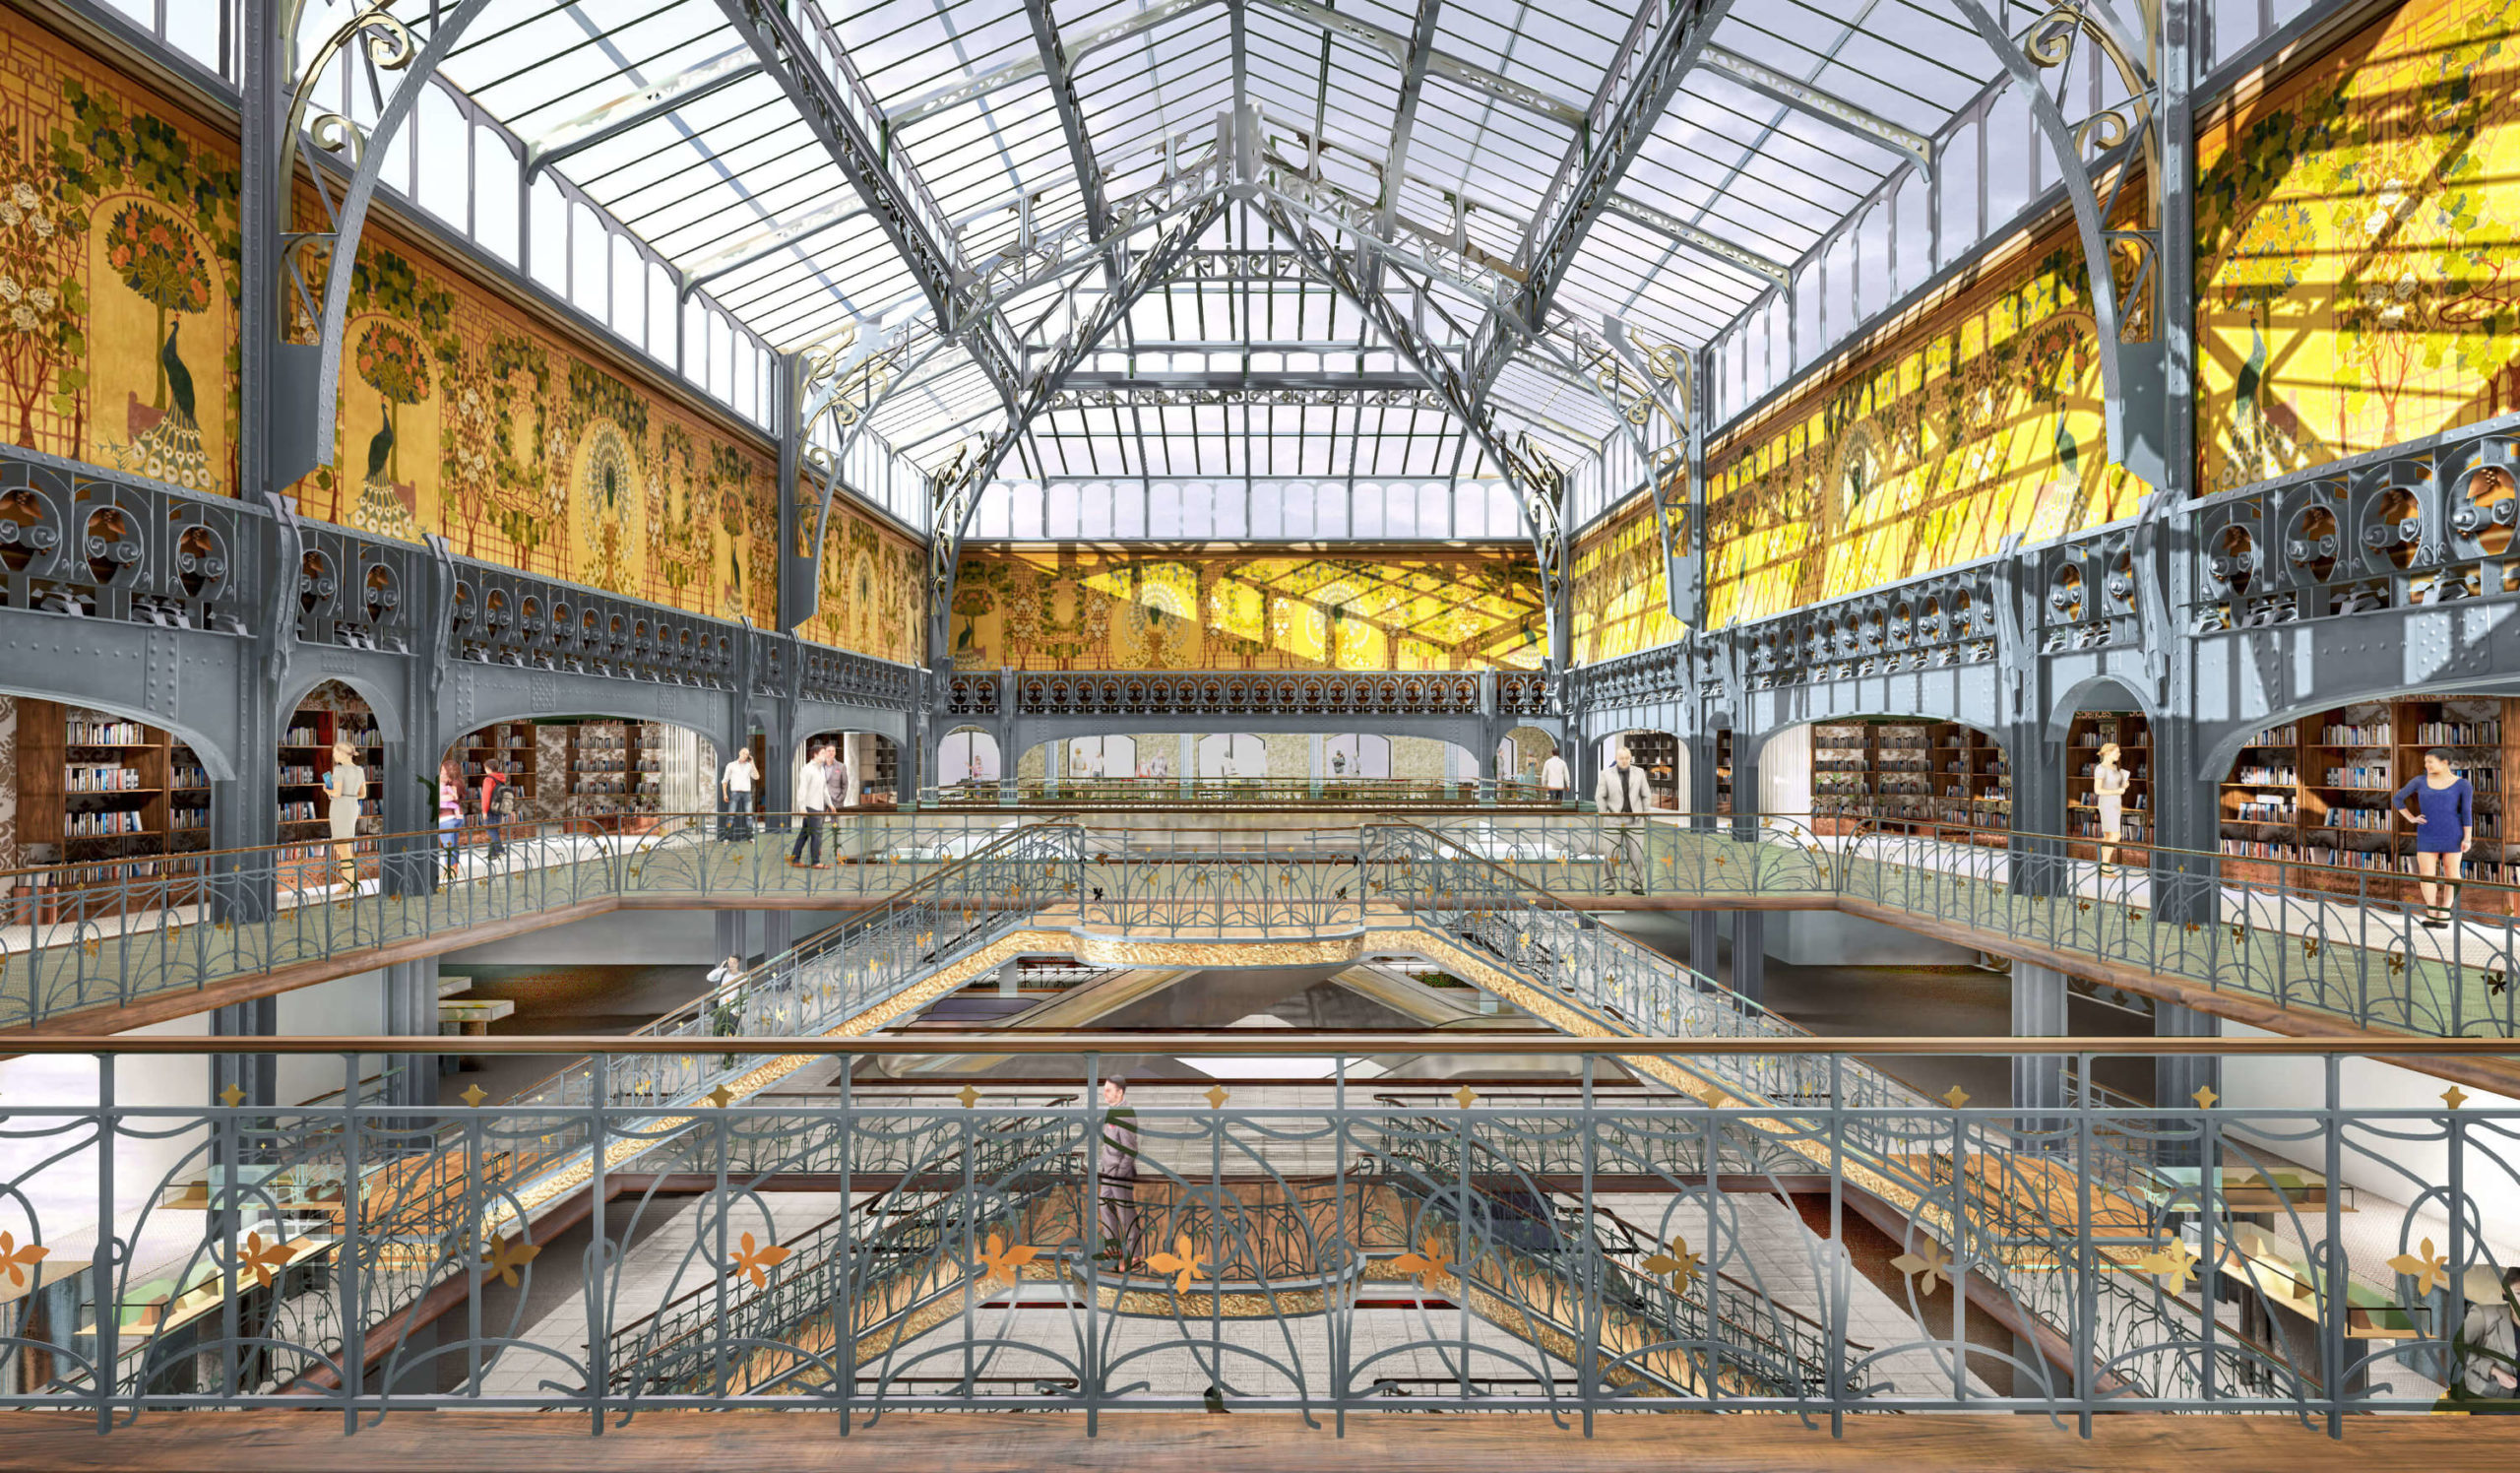 LVMH to reopen Paris La Samaritaine complex with DFS luxury store in 2019